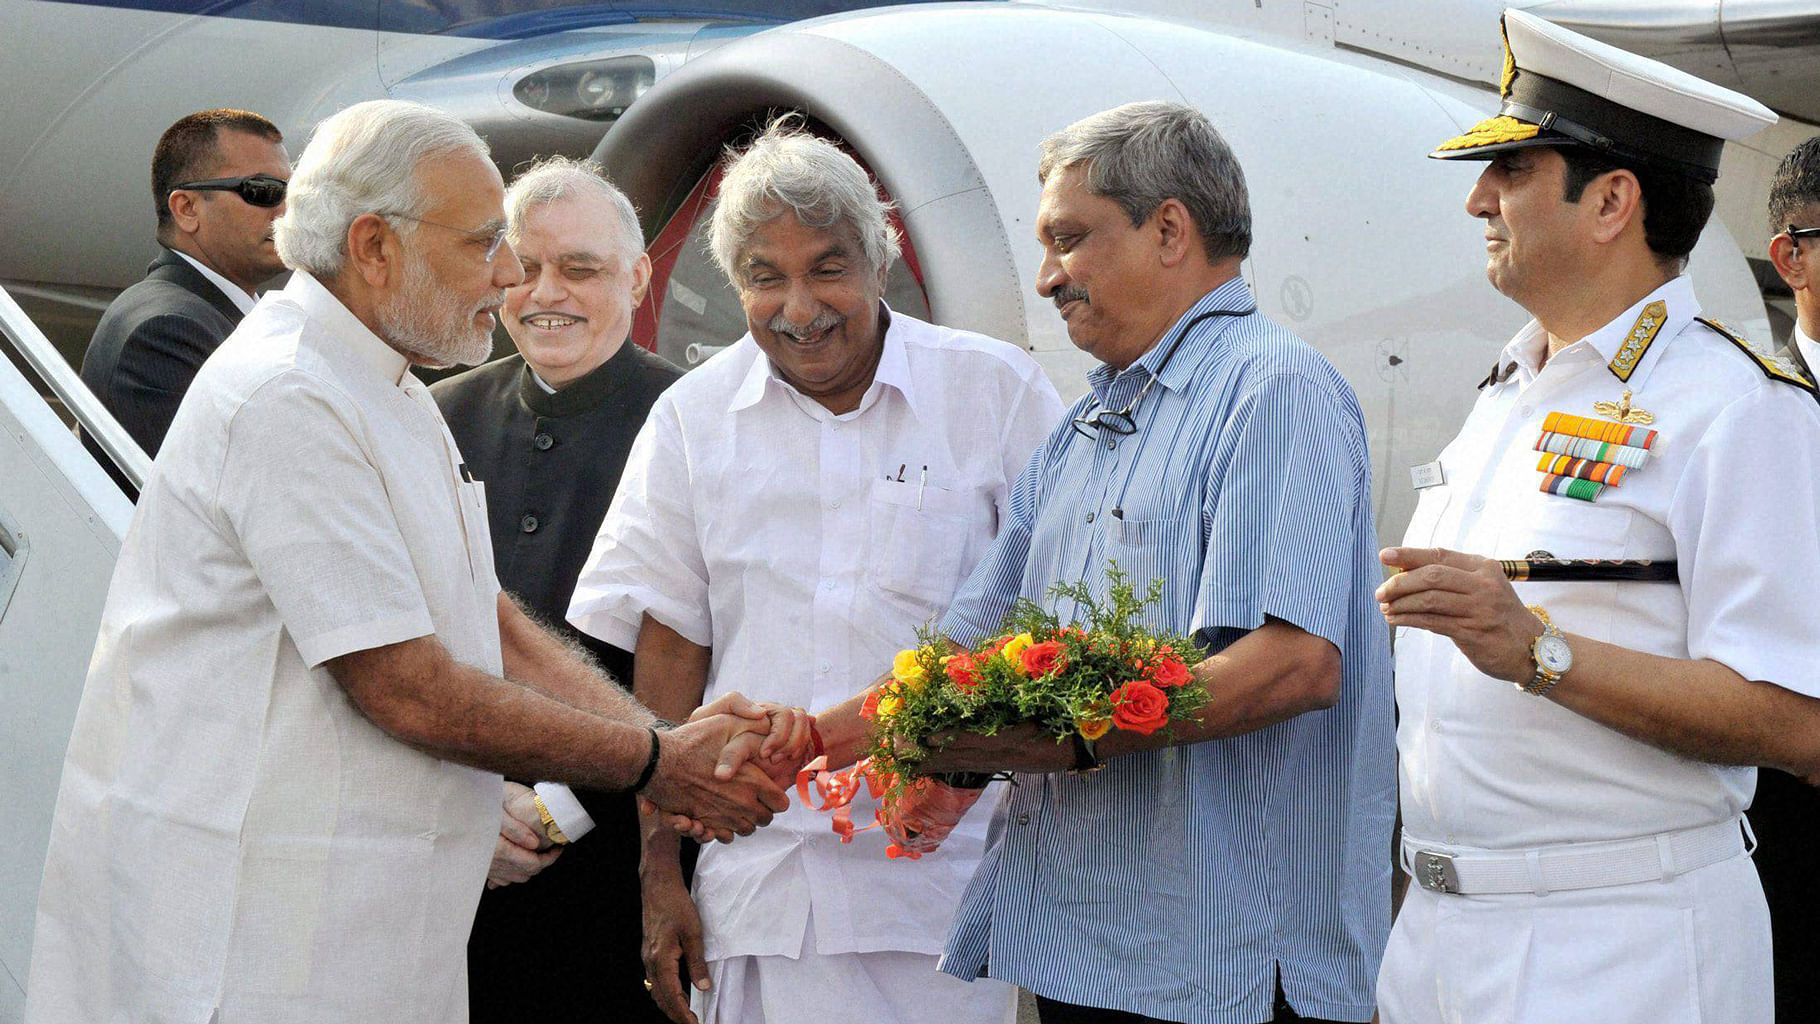 Prime Minister Narendra Modi being received by the Governor of Kerala, P. Sathasivam, CM Oommen Chandy and the Union Minister for Defence, Manohar Parrikar at Kochi. (Photo: PTI)